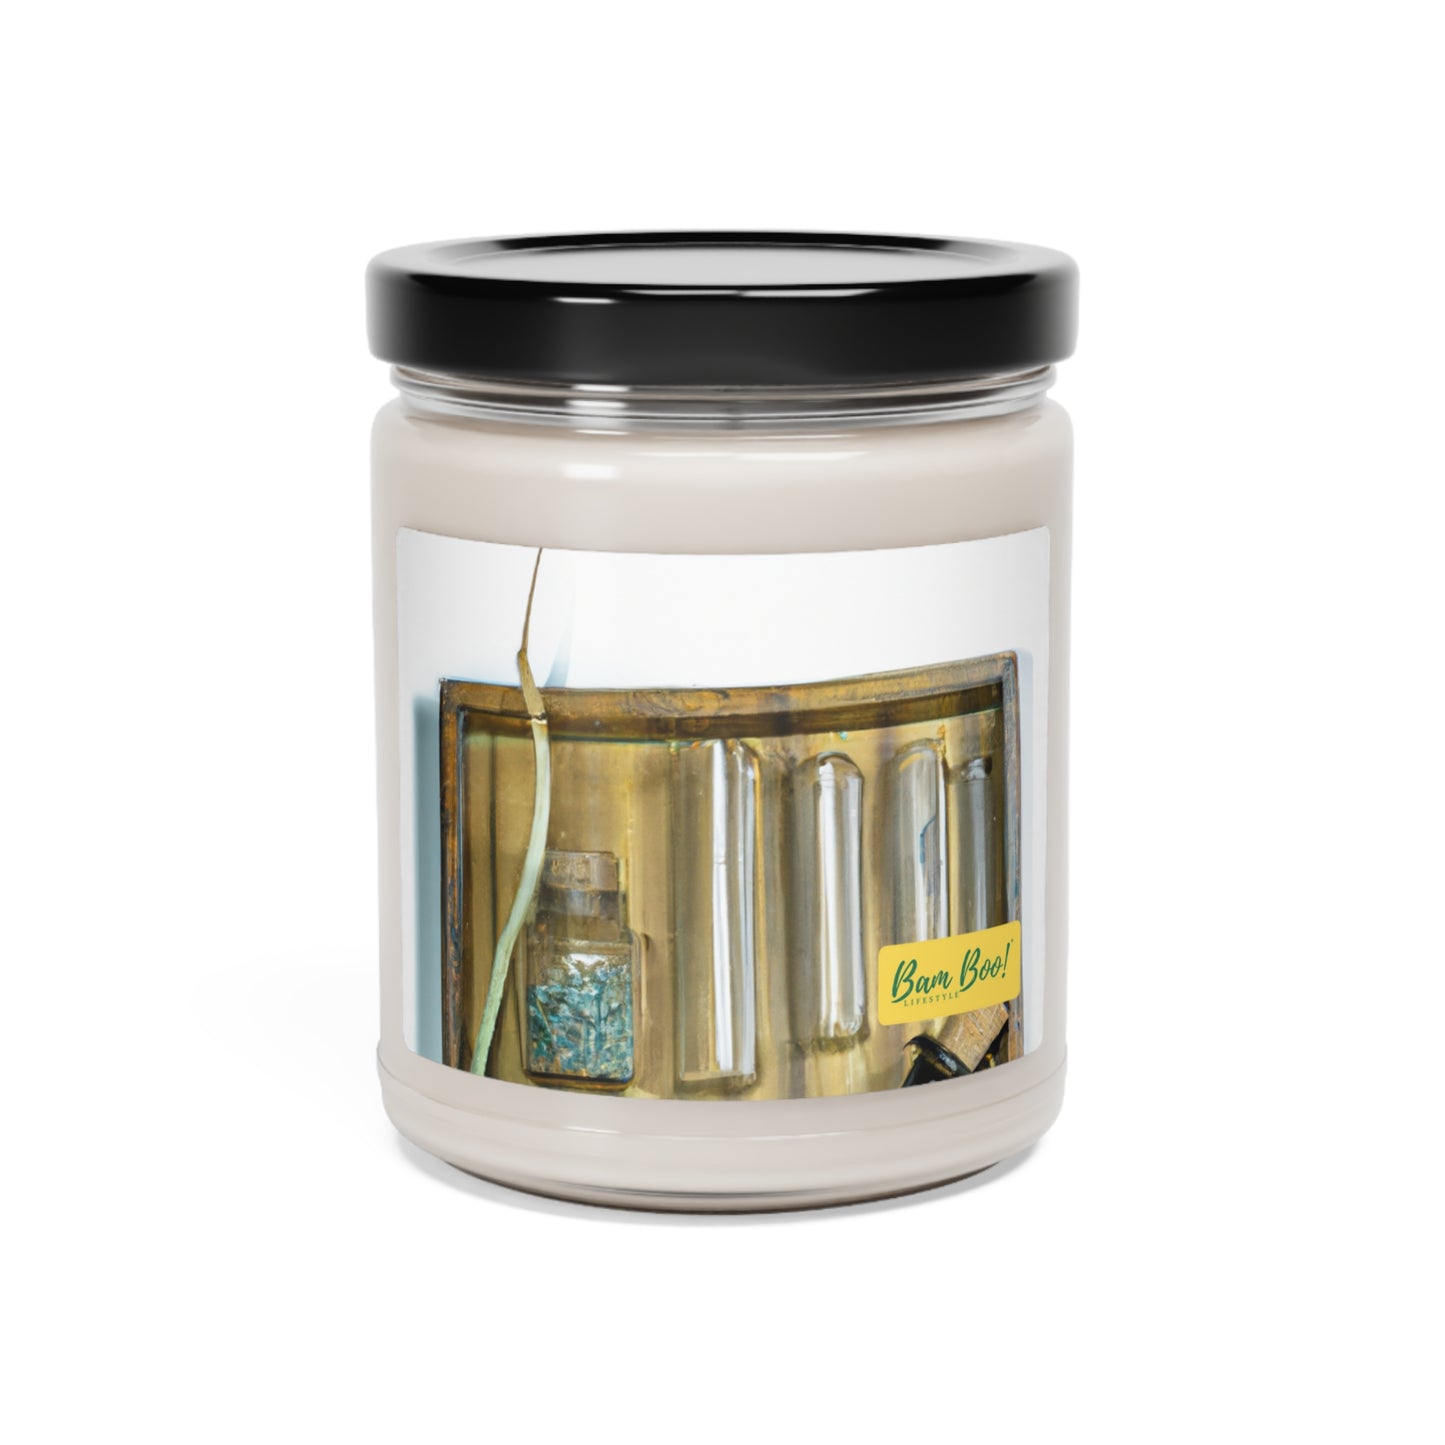 Unconventional Fusion: Art Reimagined - Bam Boo! Lifestyle Eco-friendly Soy Candle